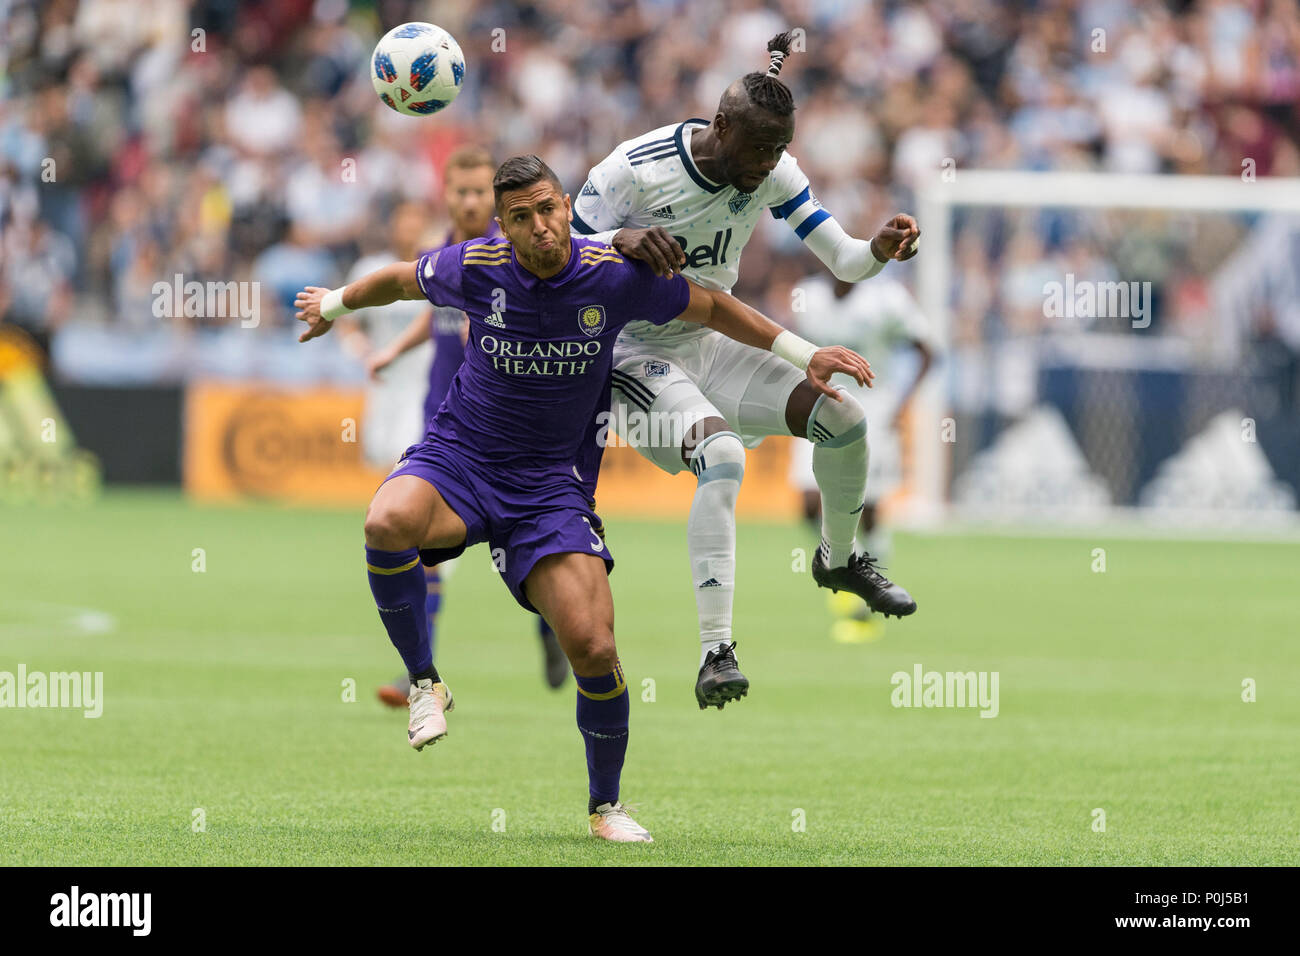 Vancouver, Canada. 9 June 2018. Amro Tarek (3) of Orlando City (left) and Kei Kamara (23) of Vancouver Whitecaps in action for the ball. Final Score Vancouver 5, Orlando 2.  Vancouver Whitecaps vs Orlando City SC BC Place.  © Gerry Rousseau/Alamy Live News Stock Photo